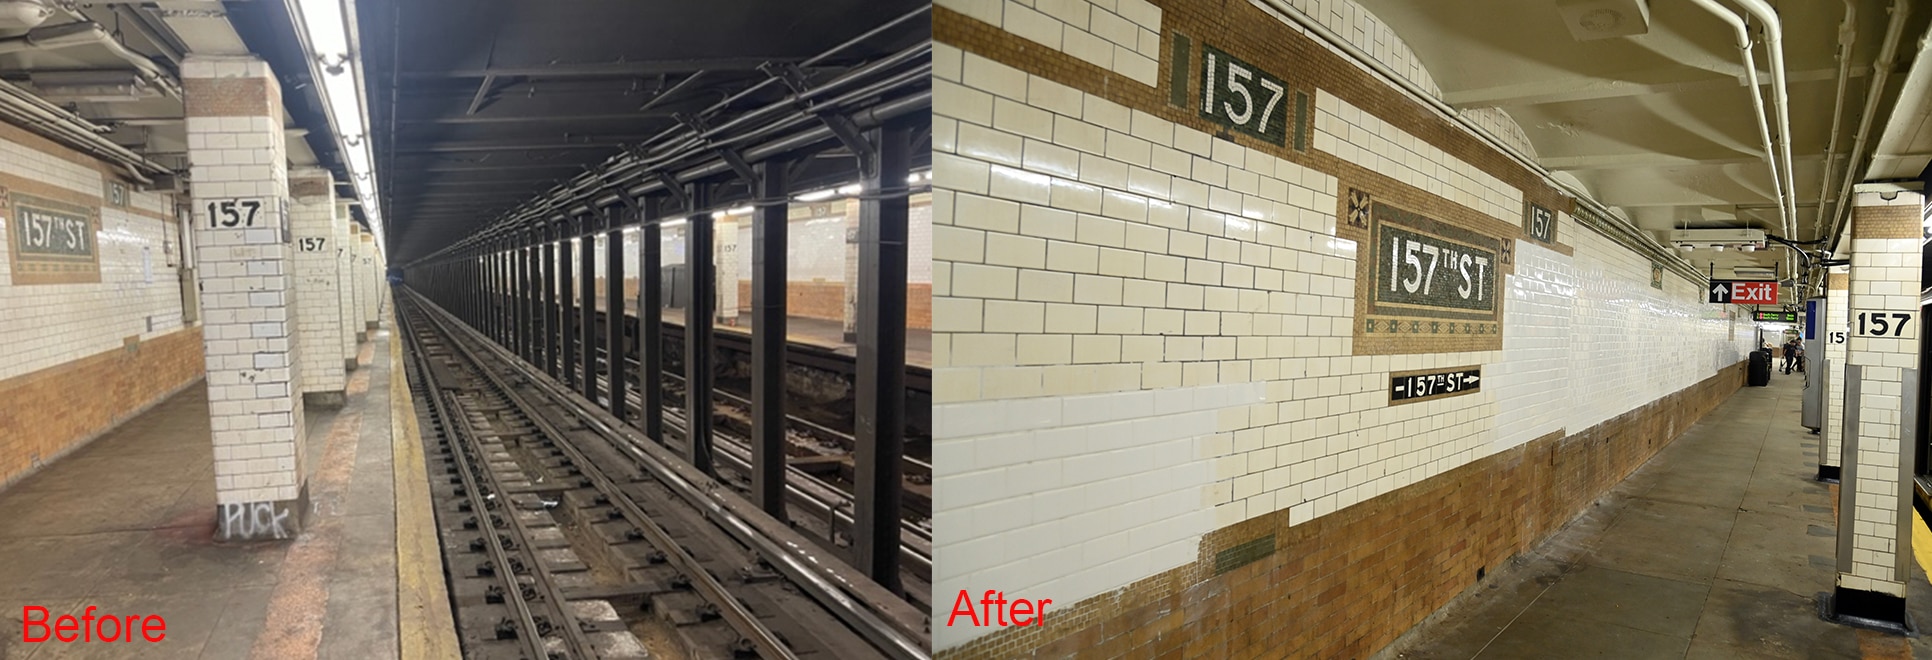 MTA Completes Re-NEW-Vation at 157 St 1 Station